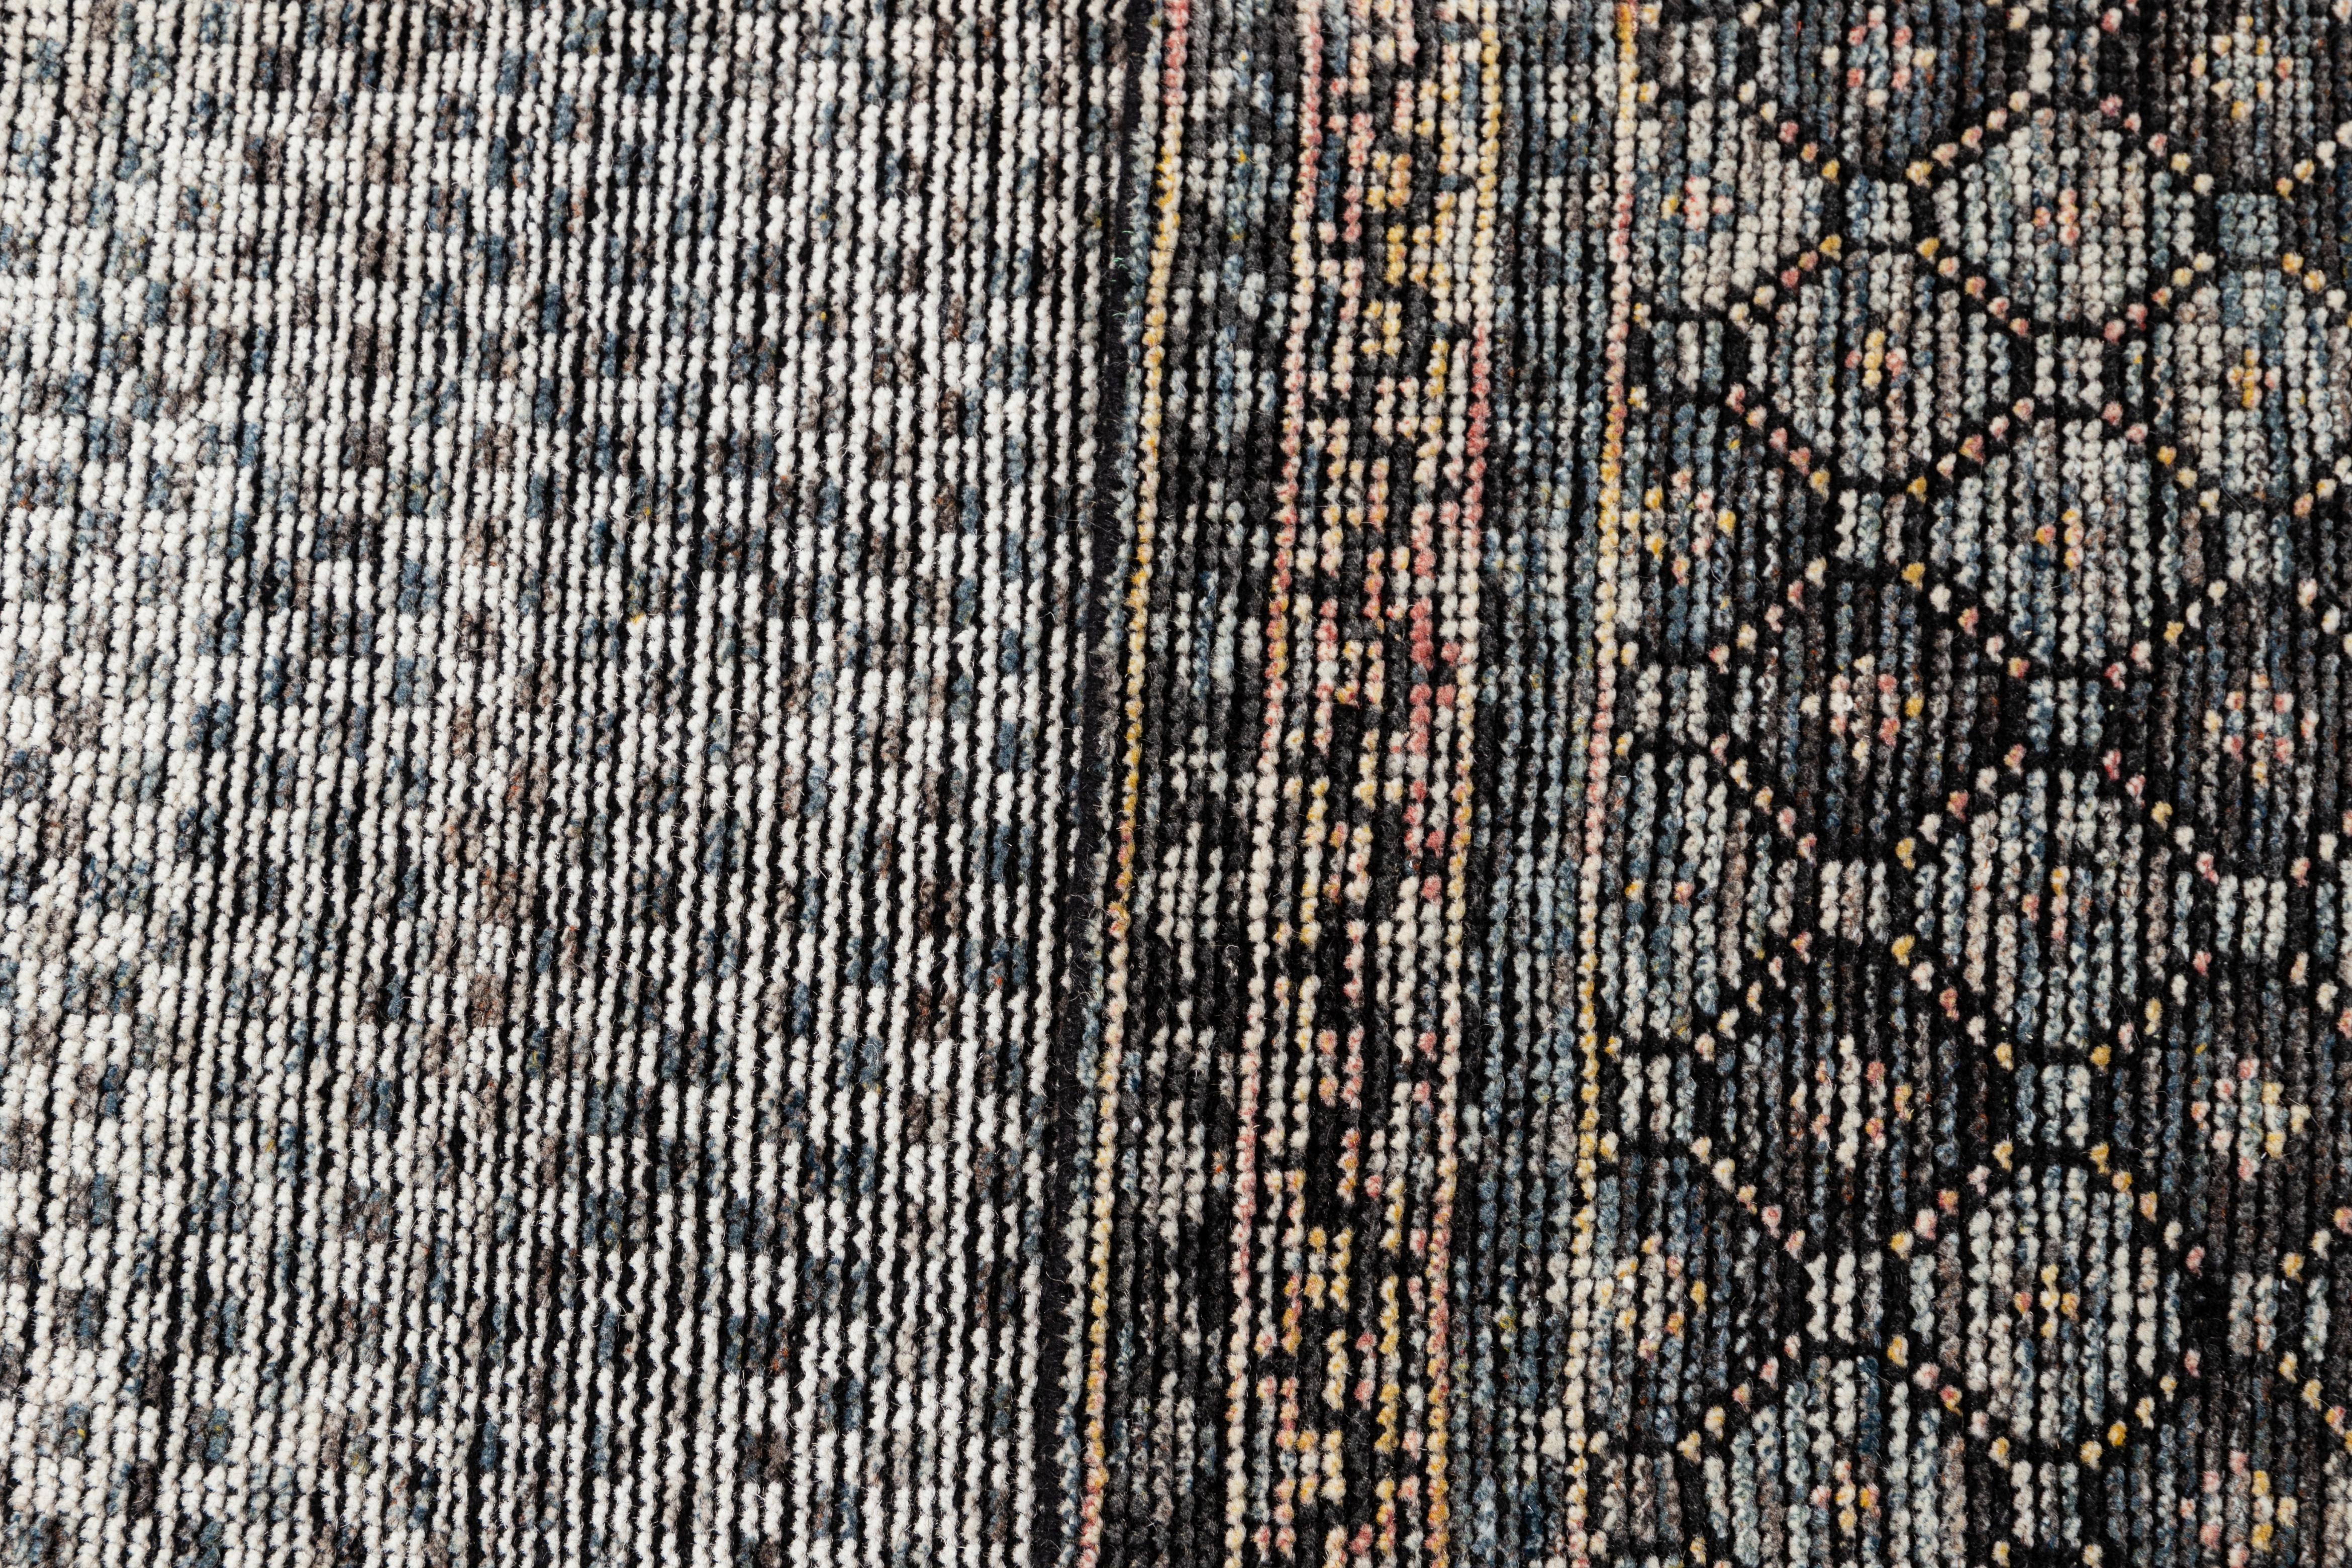 Distressed custom wool rug. Custom sizes and colors made to order.

Collection: Cove
Material: Wool
Lead time: Approximate 12 weeks
Available colors: As shown, other custom colors and styles available.
Made in India.

Price listed as an 8' x